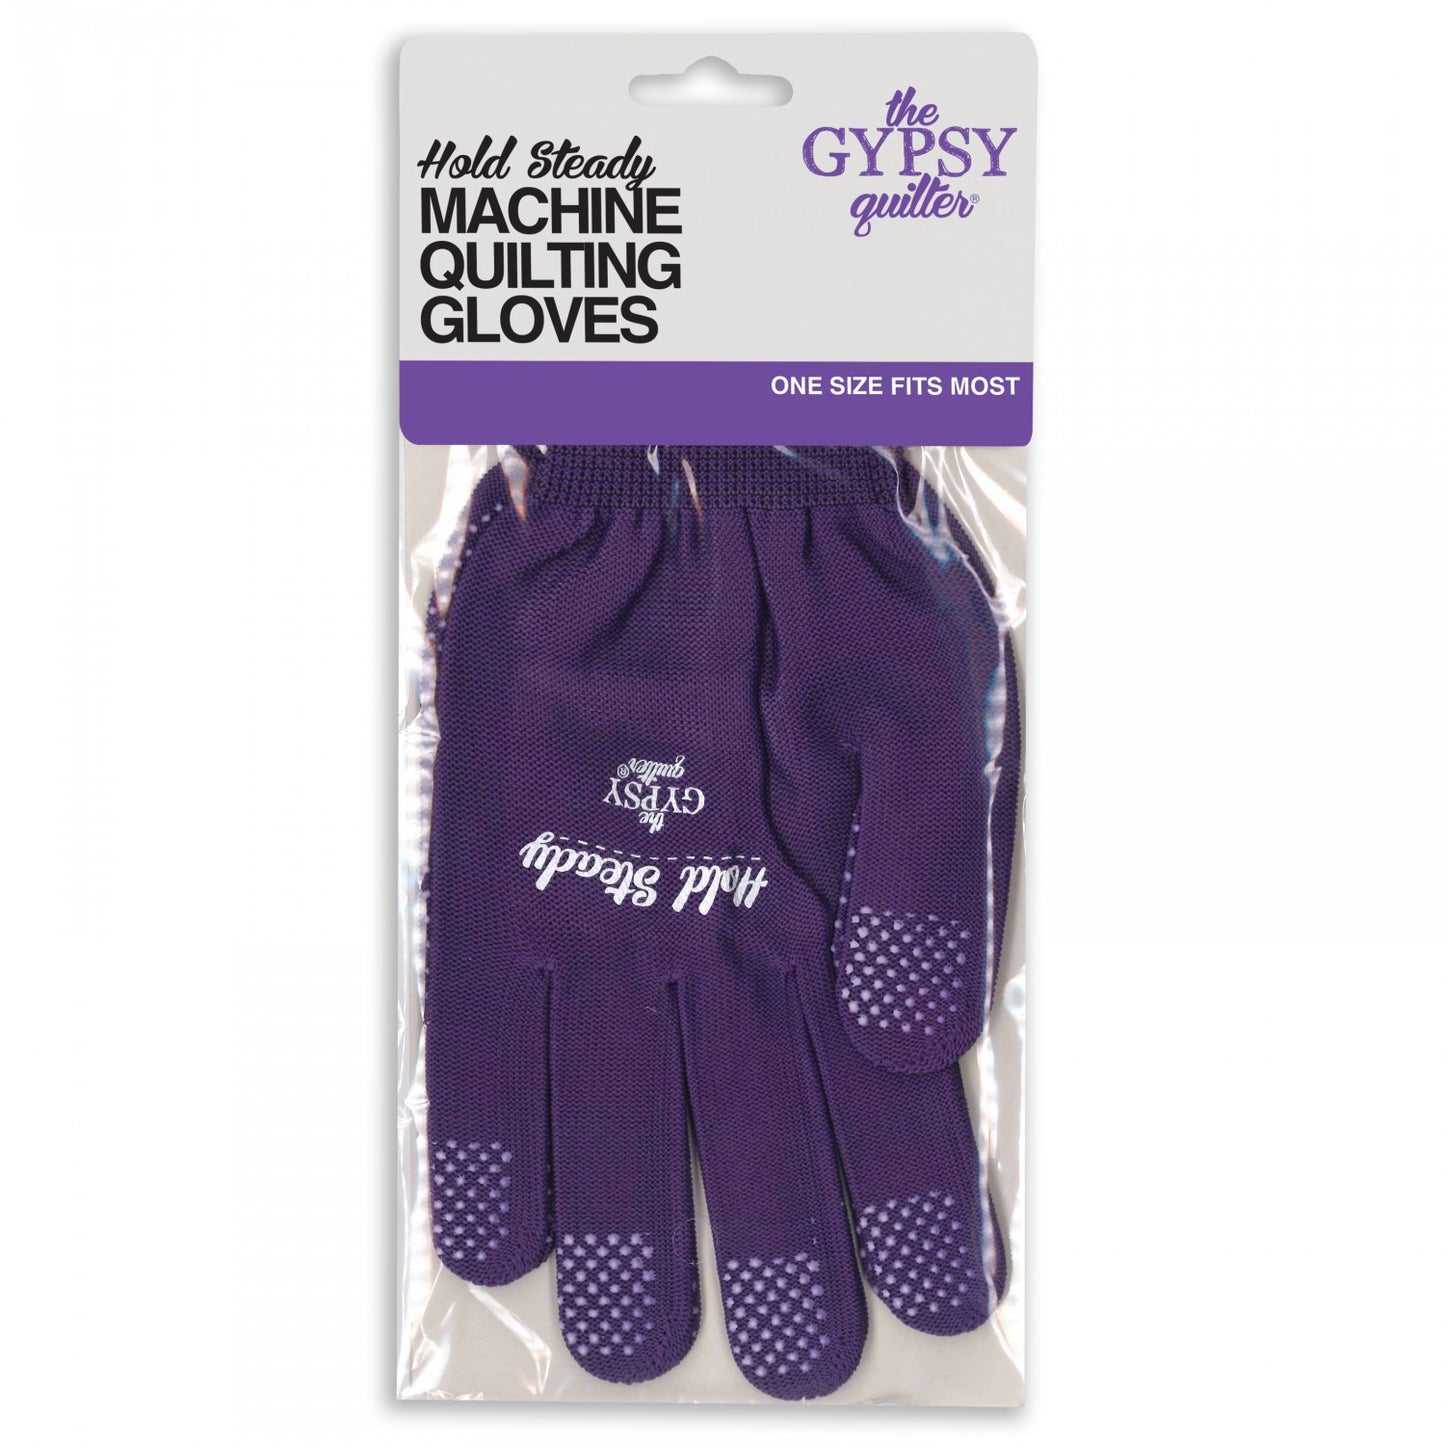 Gypsy Quilter Hold Steady Machine Gloves One Size, Notions